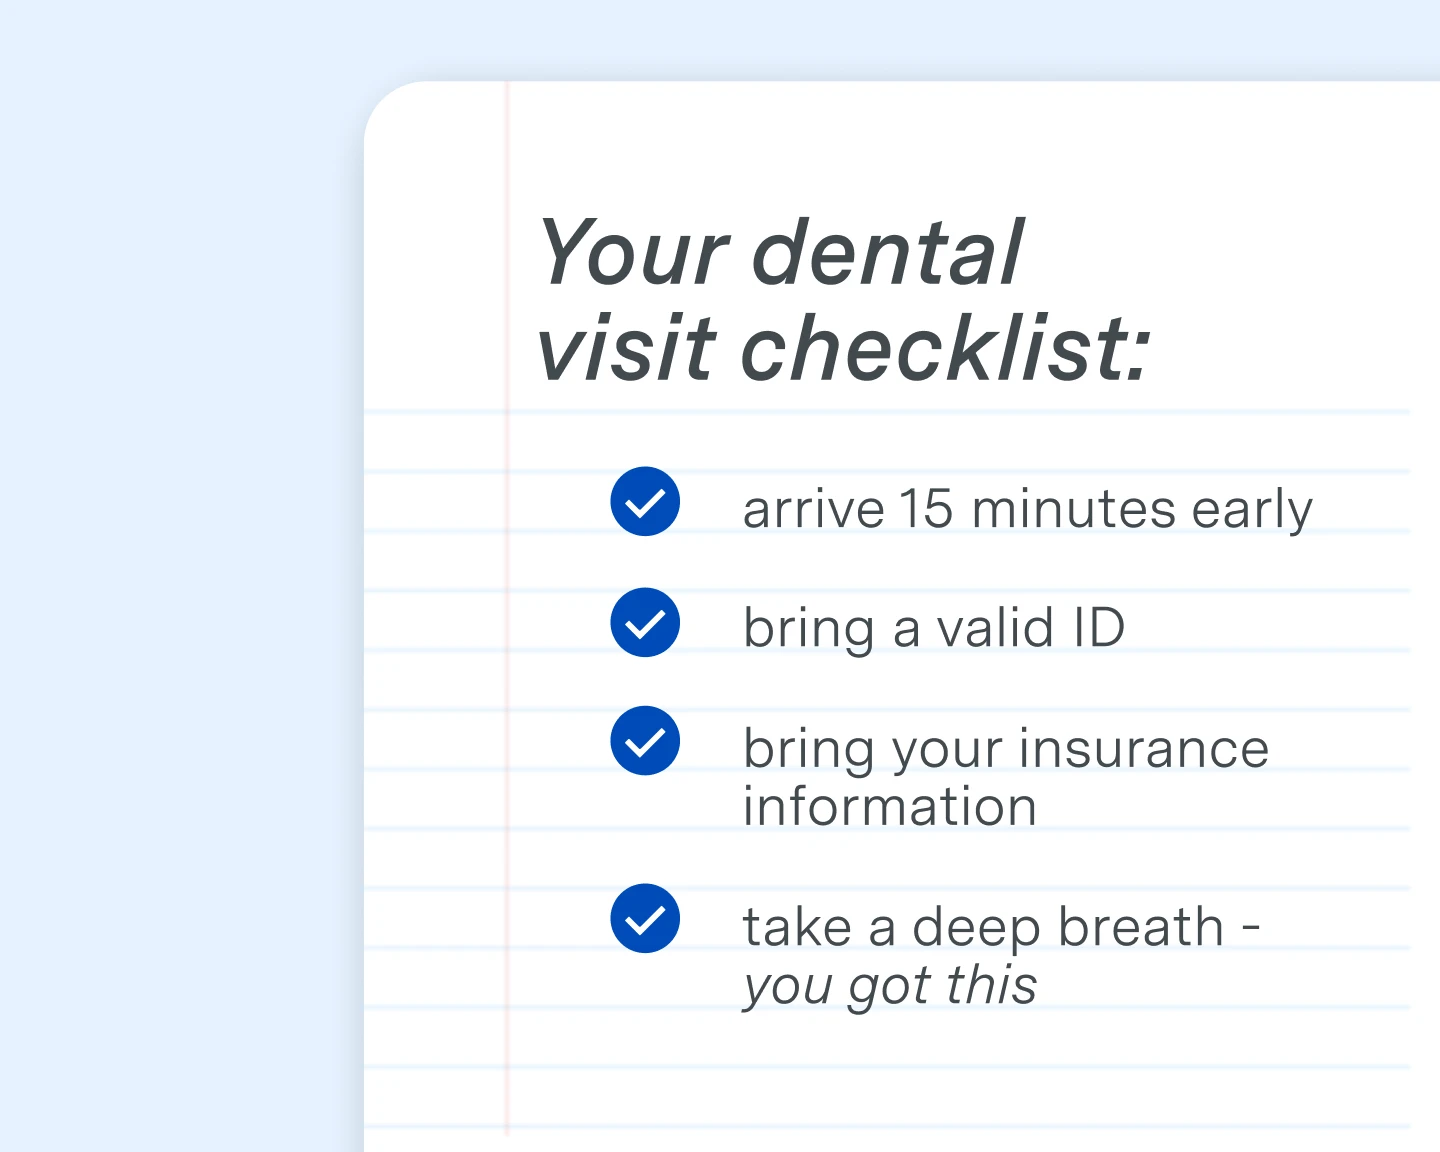 Aspen Dental visit checklist. 
1. arrive 15 minutes early 
2. bring a valid ID
3. bring your insurance information
4. take a deep breath - you got this